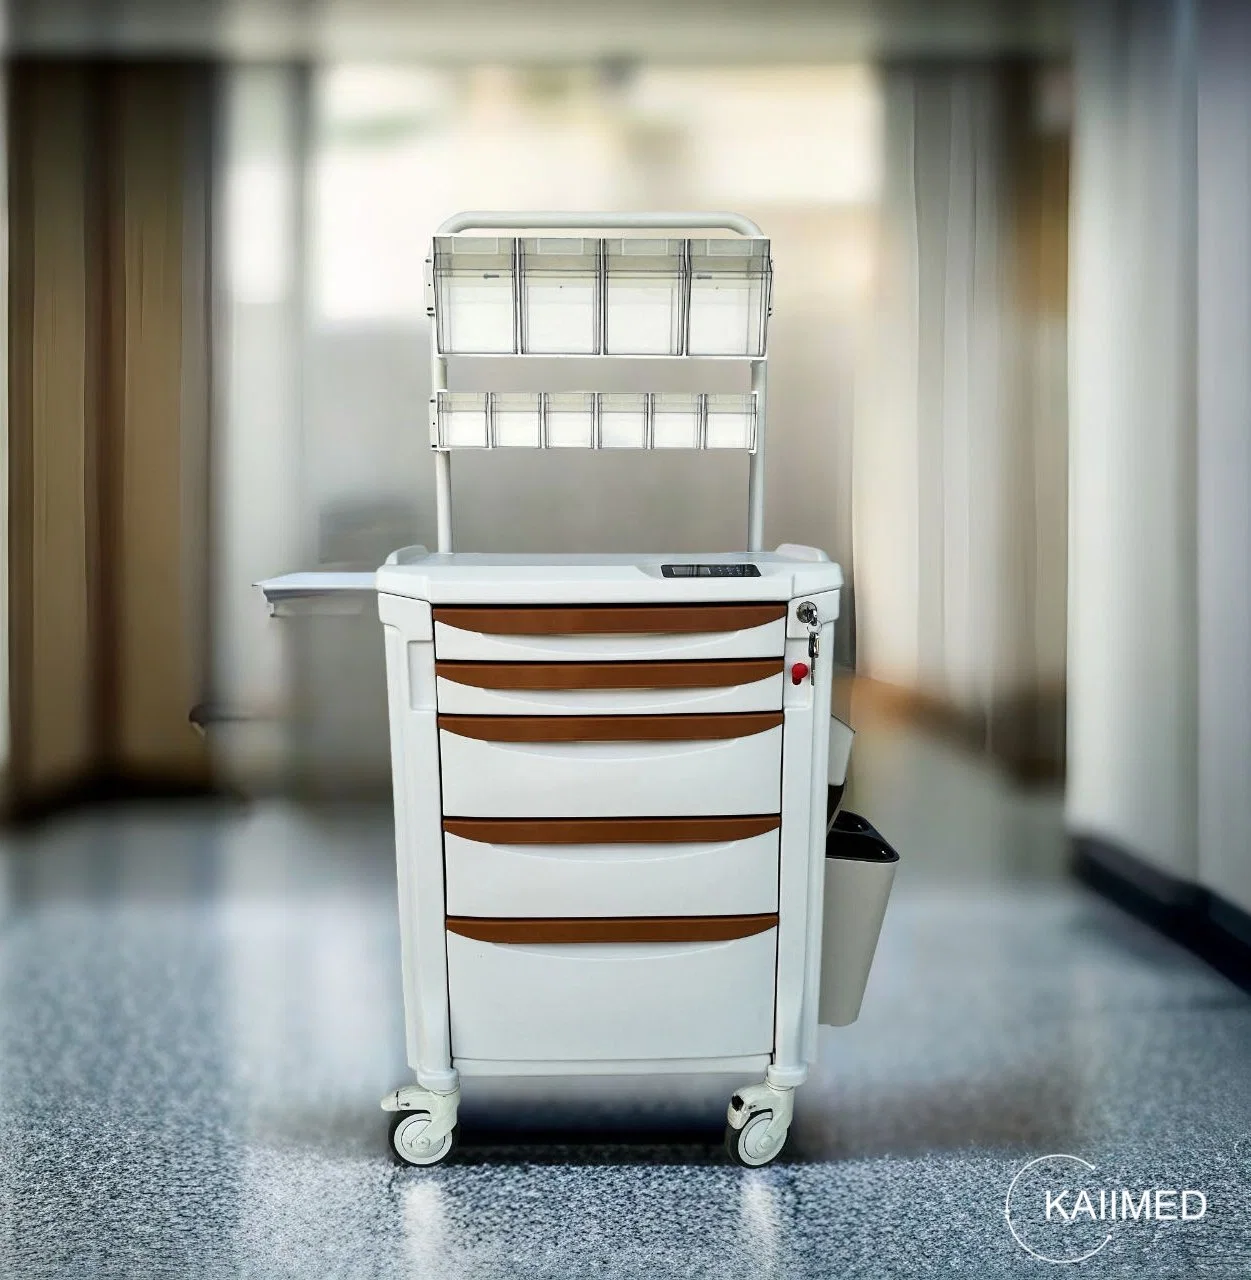 ABS Anesthesia Trolley and Cart with Drawers for Medical, Emergency, Logistic, Linen, Laundry, Treatment, Medicine Distribution as Hospital Equipment- E